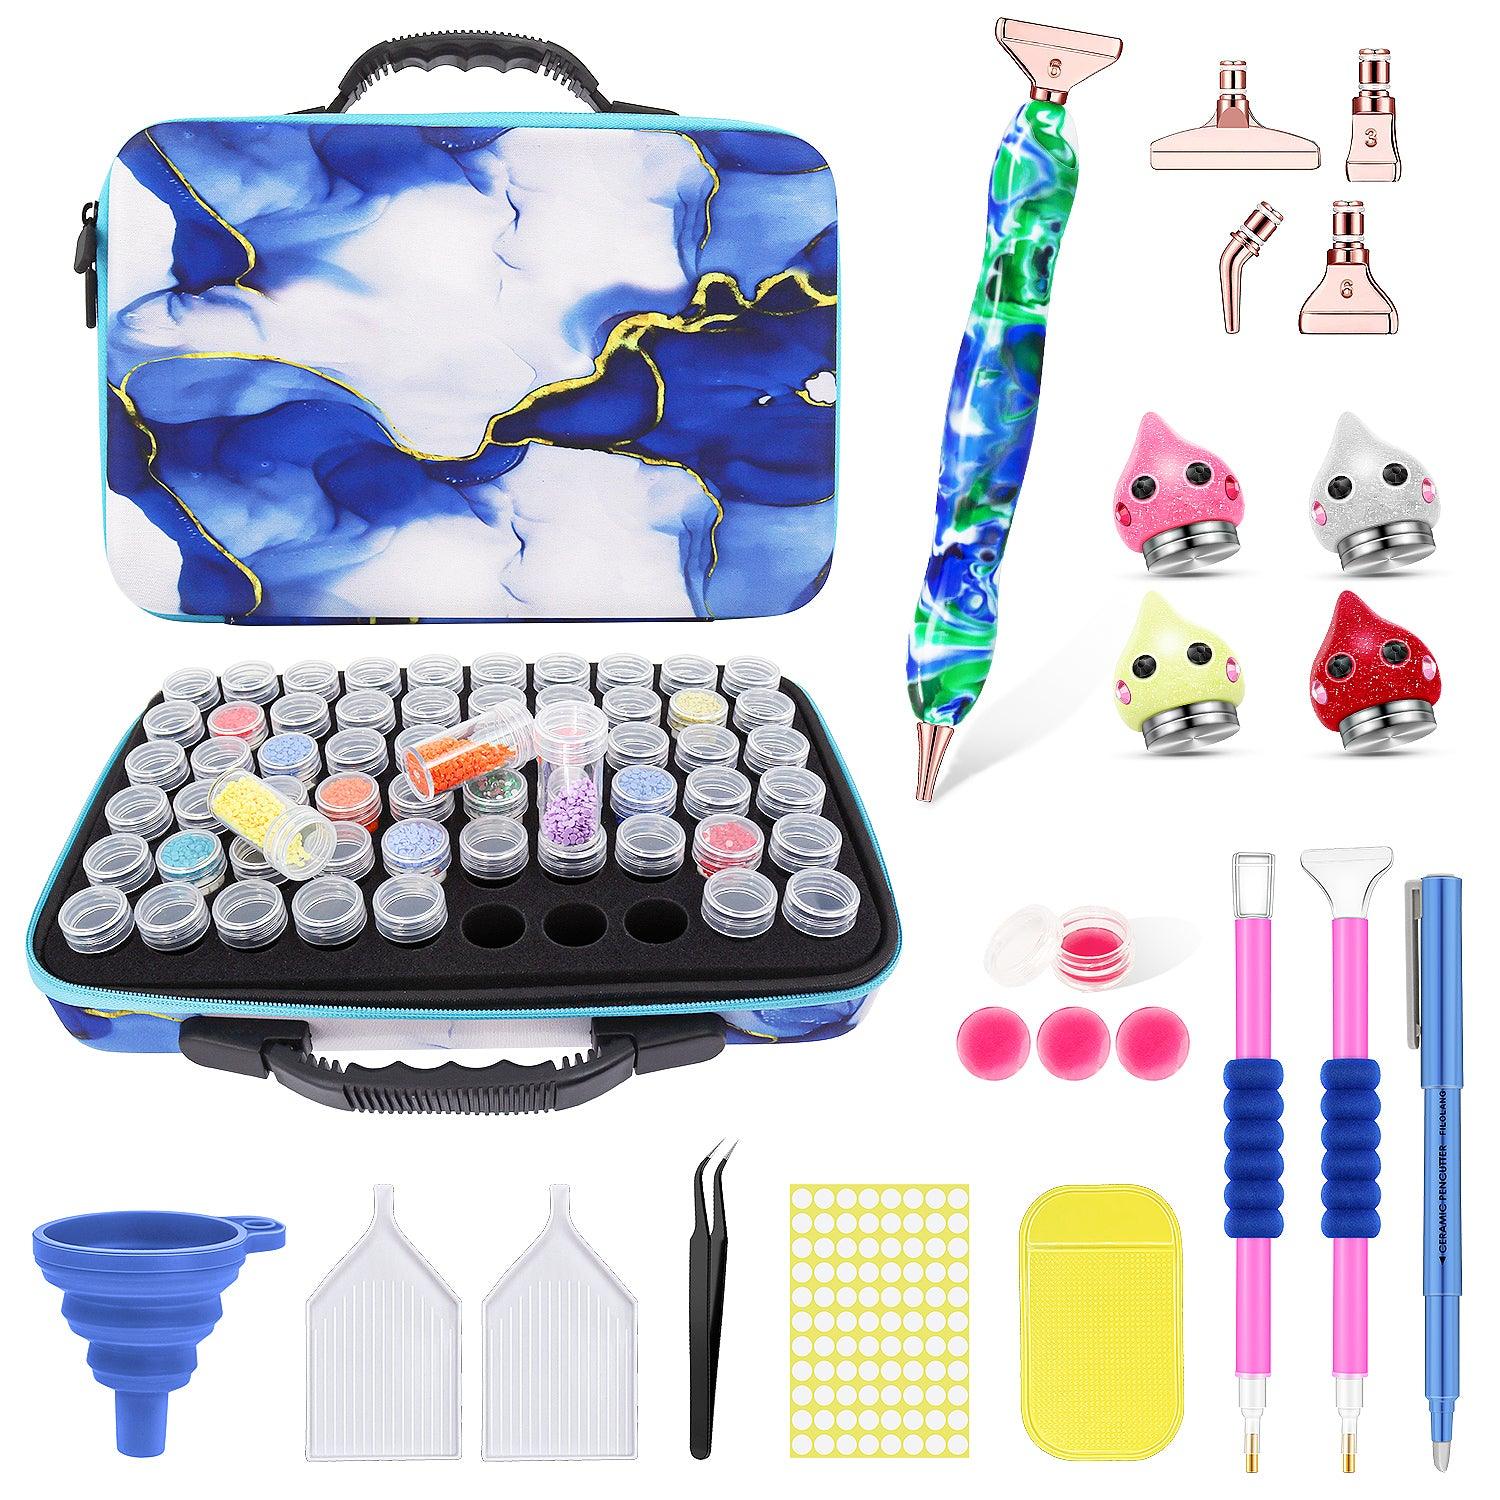 Cloud 80 in 1 Diamond Painting Tool Kits Storage Container